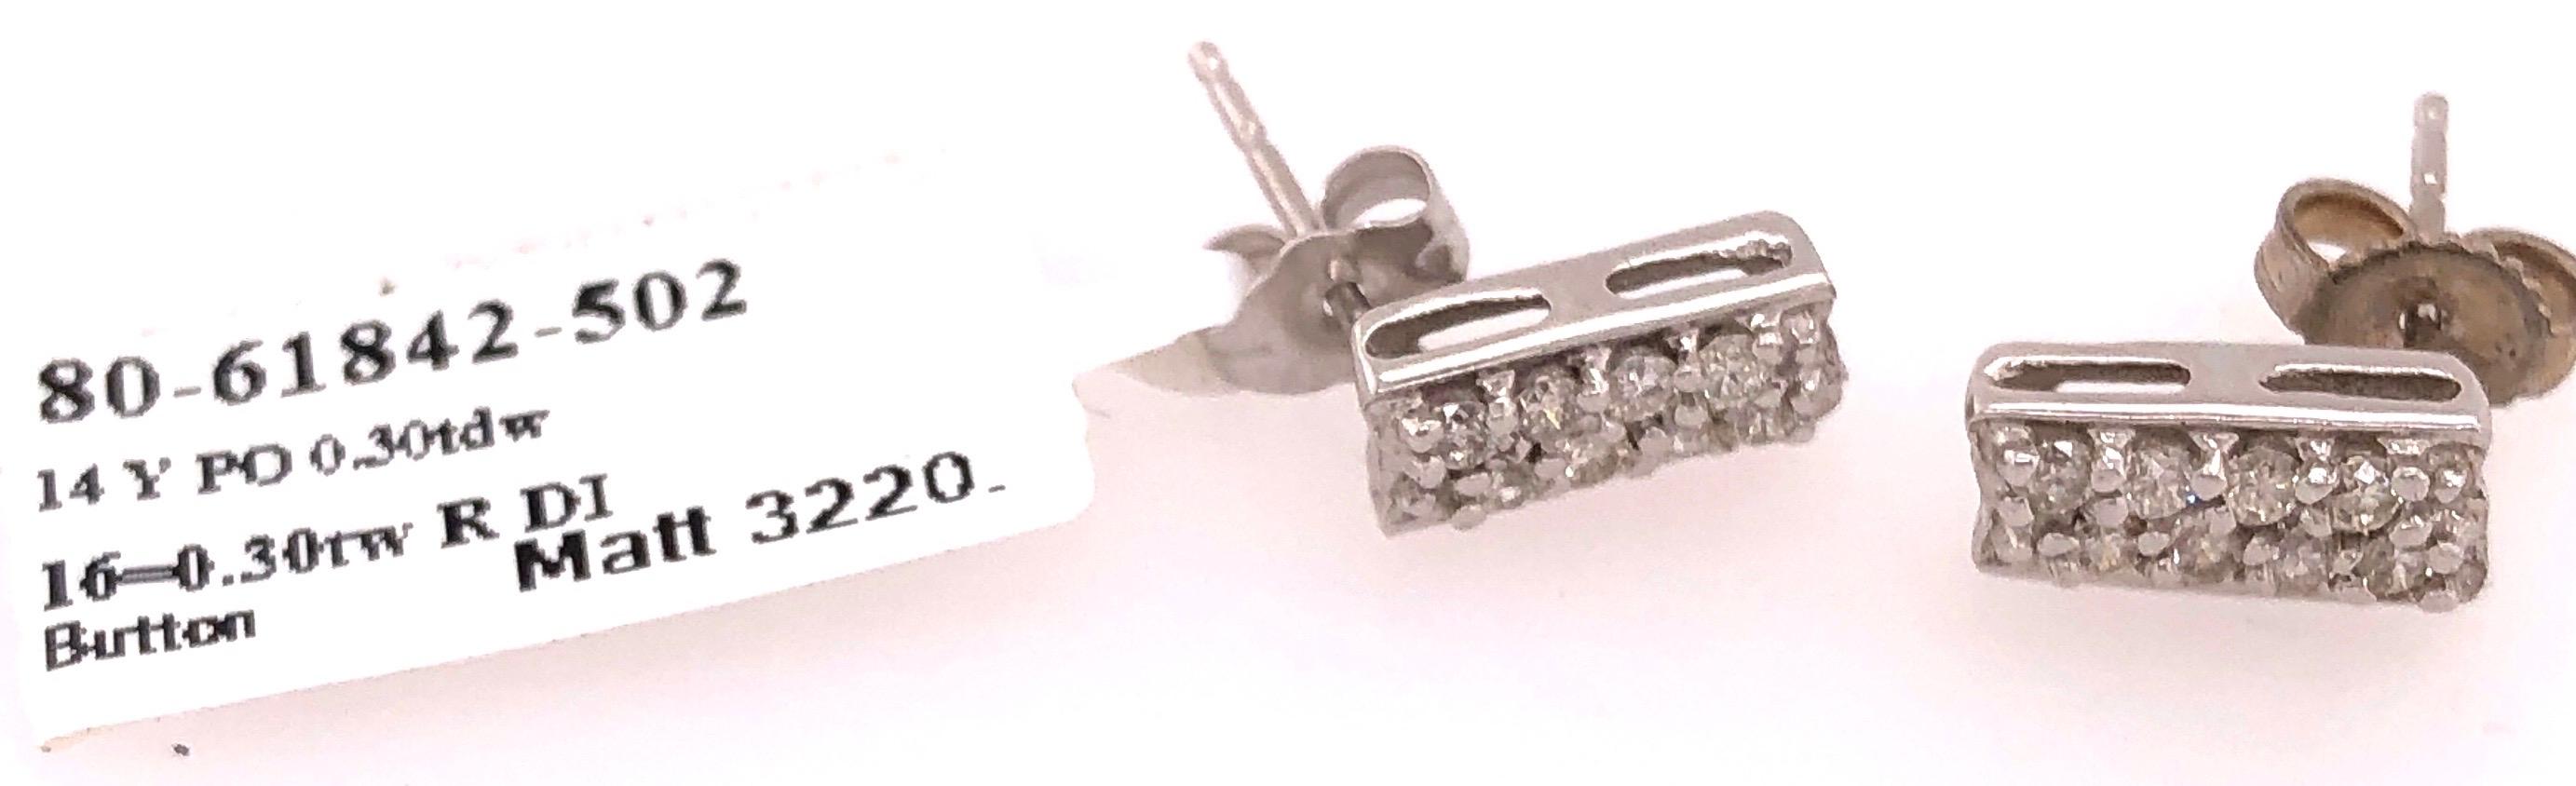 Button White Gold Earrings with 16 Diamonds For Sale 3